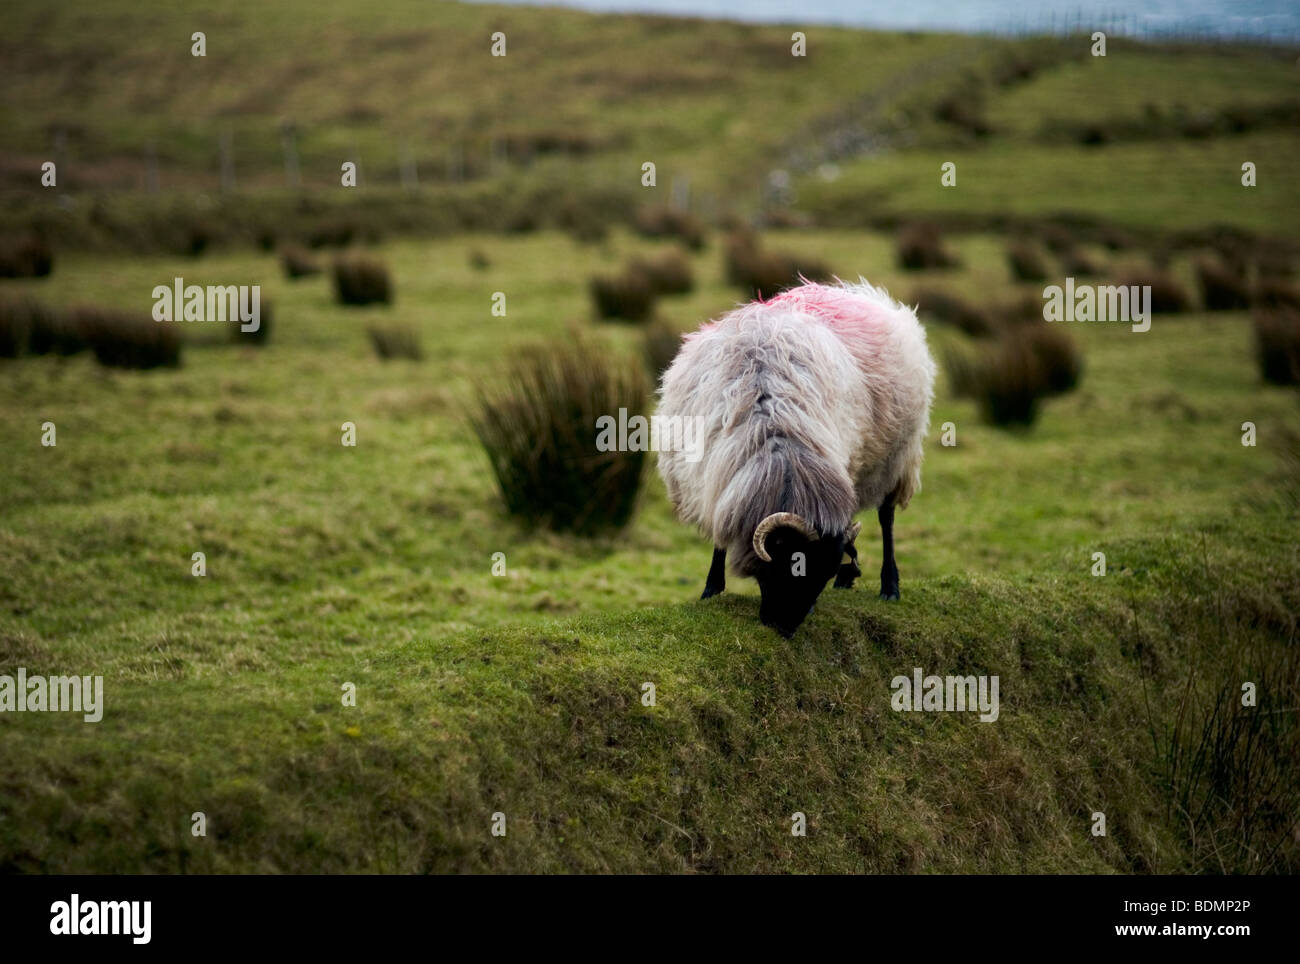 A sheep with long shaggy wool grazing on Clare Island off County Mayo on the west coast of Ireland. Christmas 2008. Stock Photo